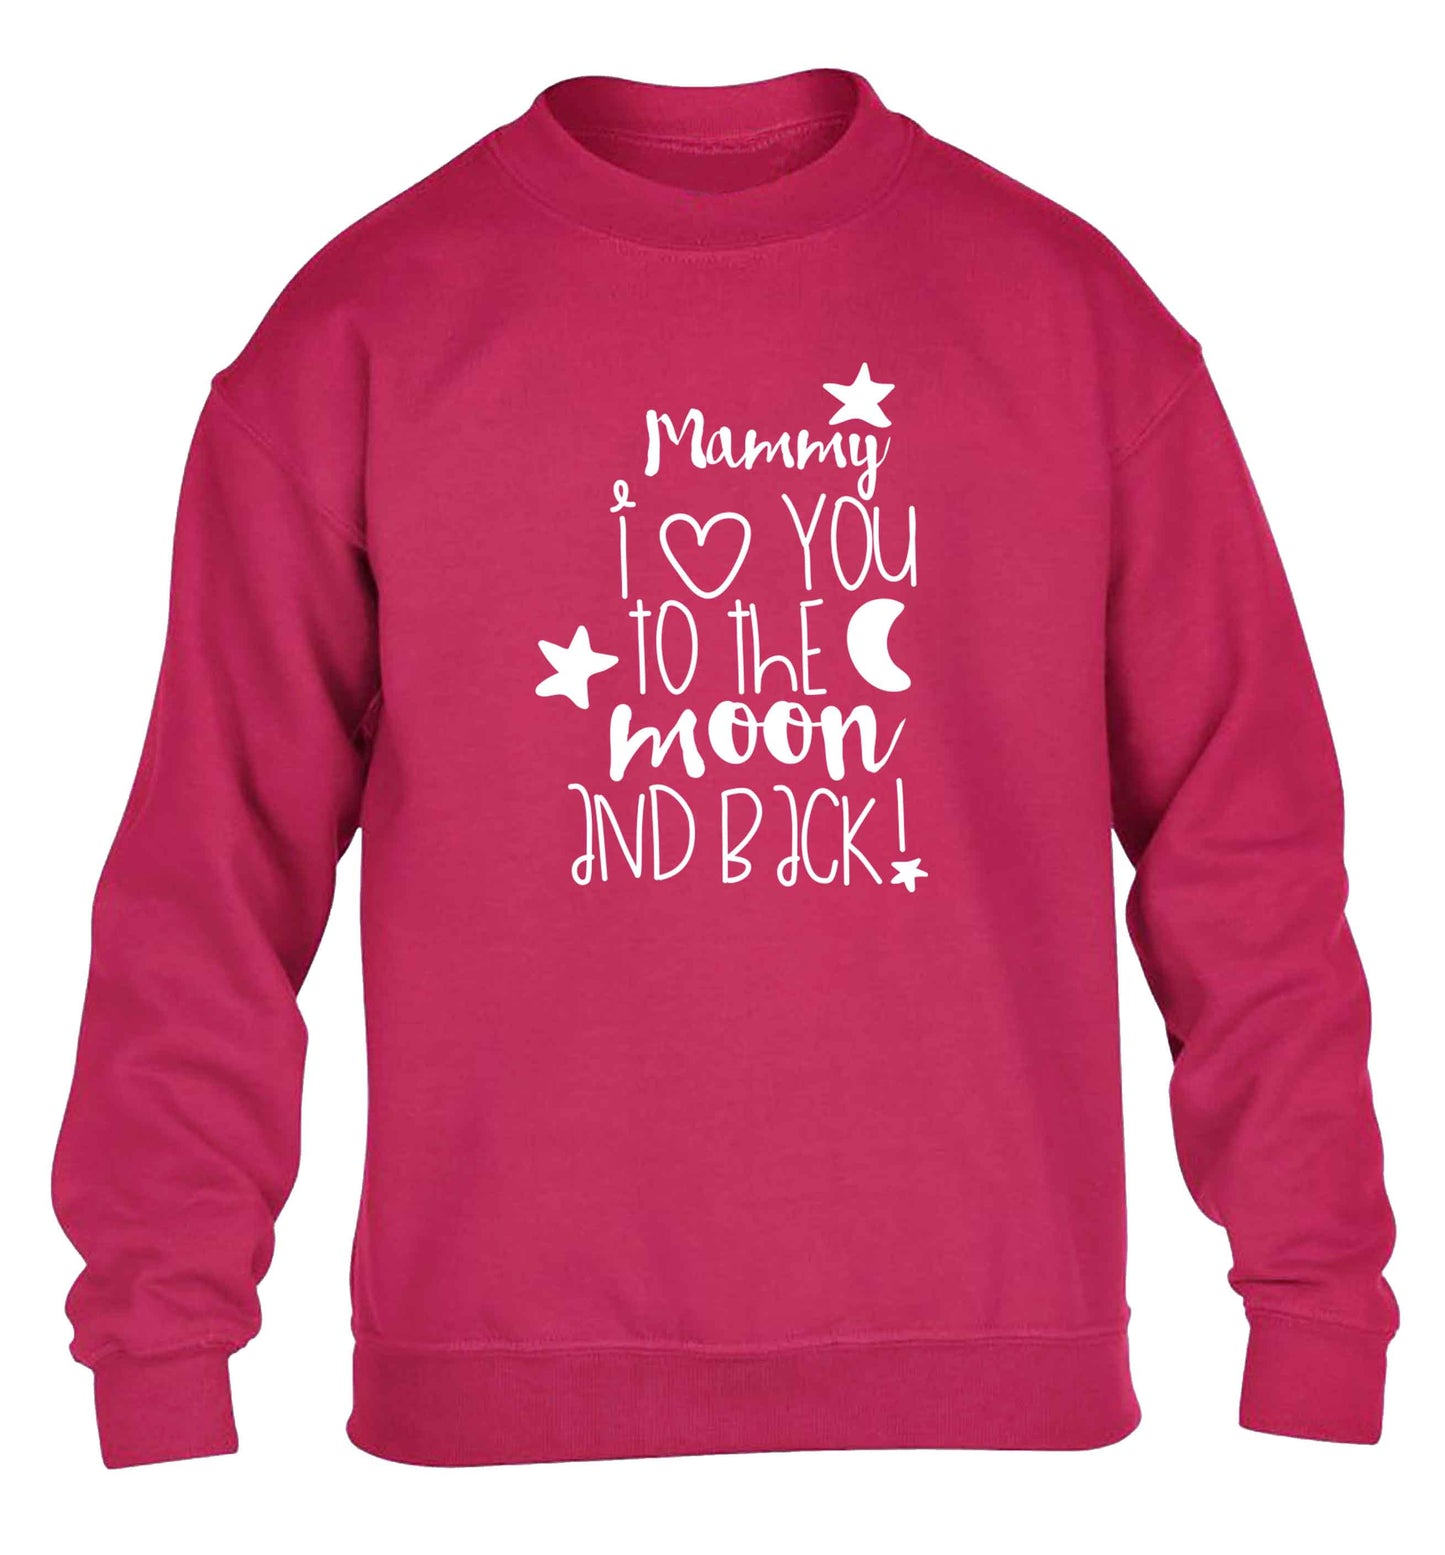 Mammy I love you to the moon and back children's pink sweater 12-13 Years